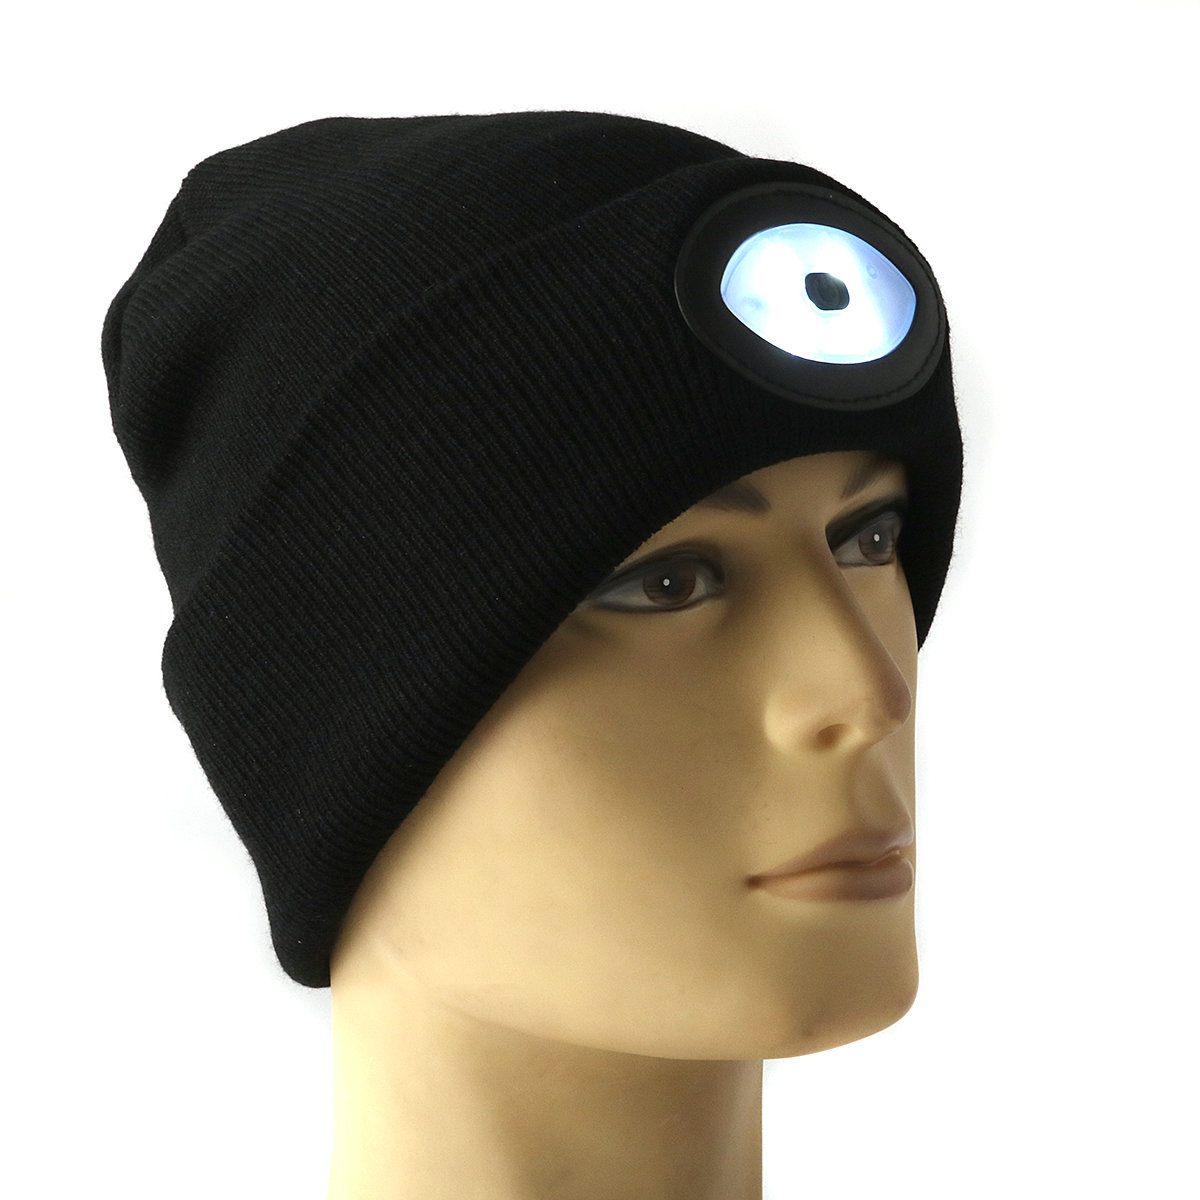 Clearance S1670 USB Ricaricabile LED Cappello Beanie Running Inverno torcia mani libere 